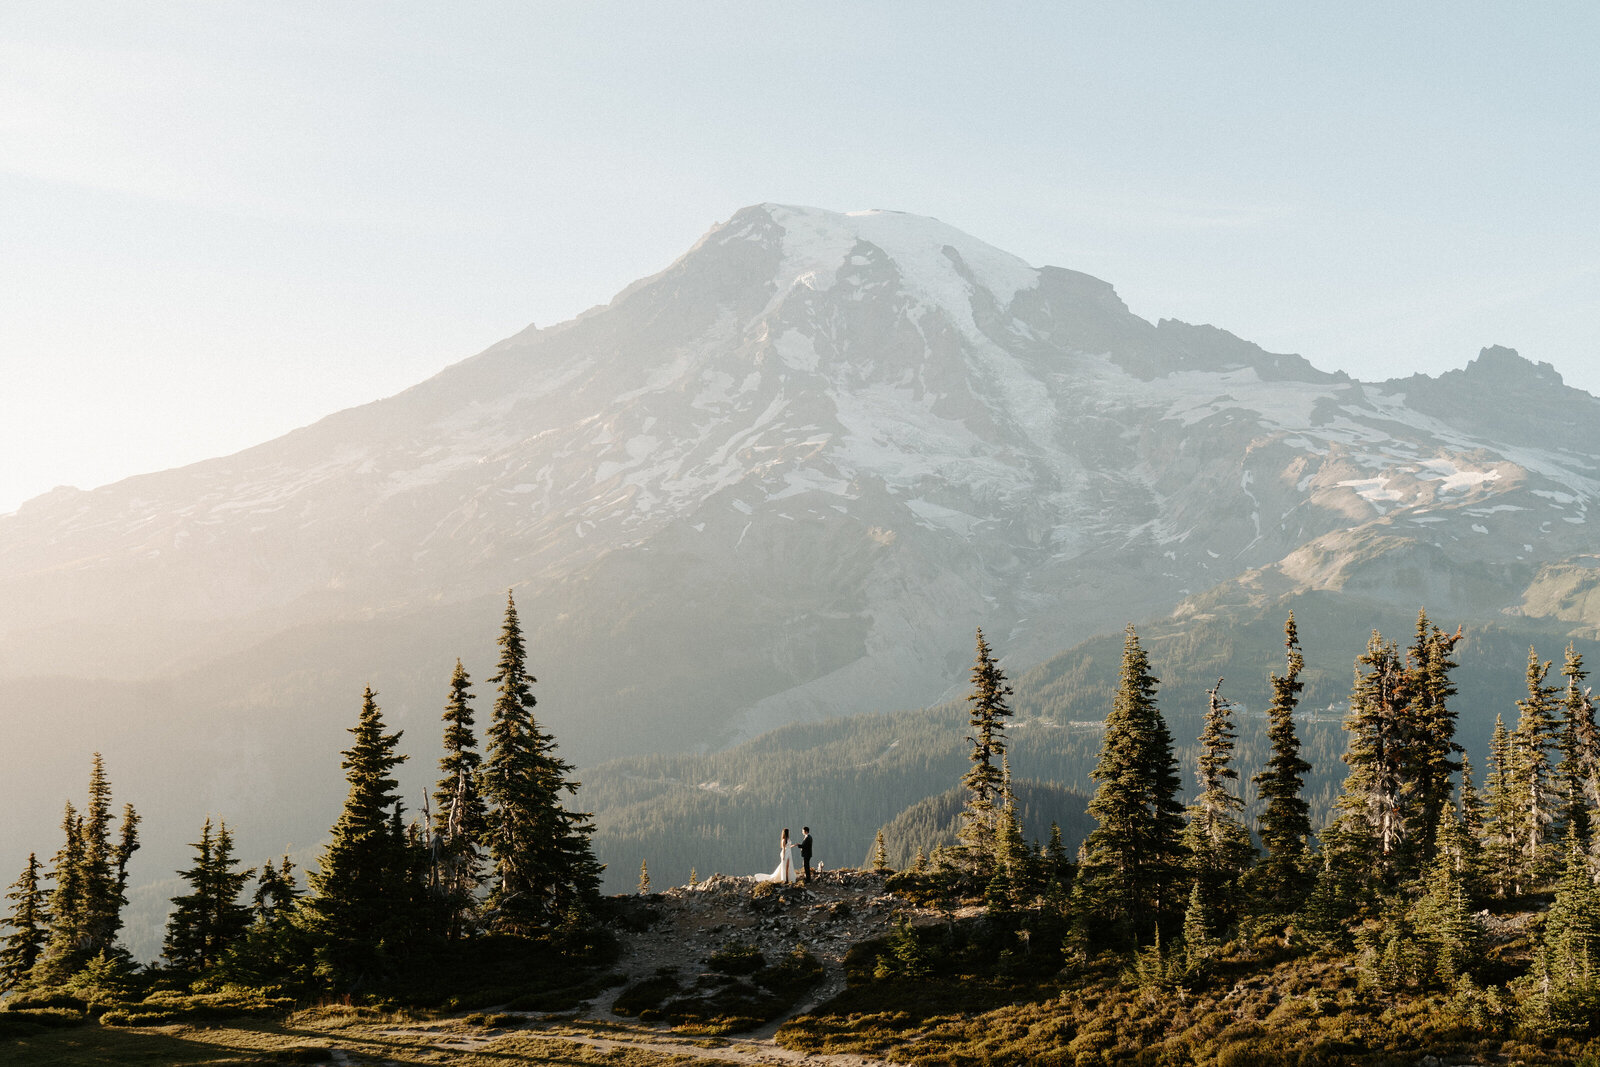 Bride and groom kissing for a wedding portrait in front of Mount Rainier with the bride's veil flowing behind her